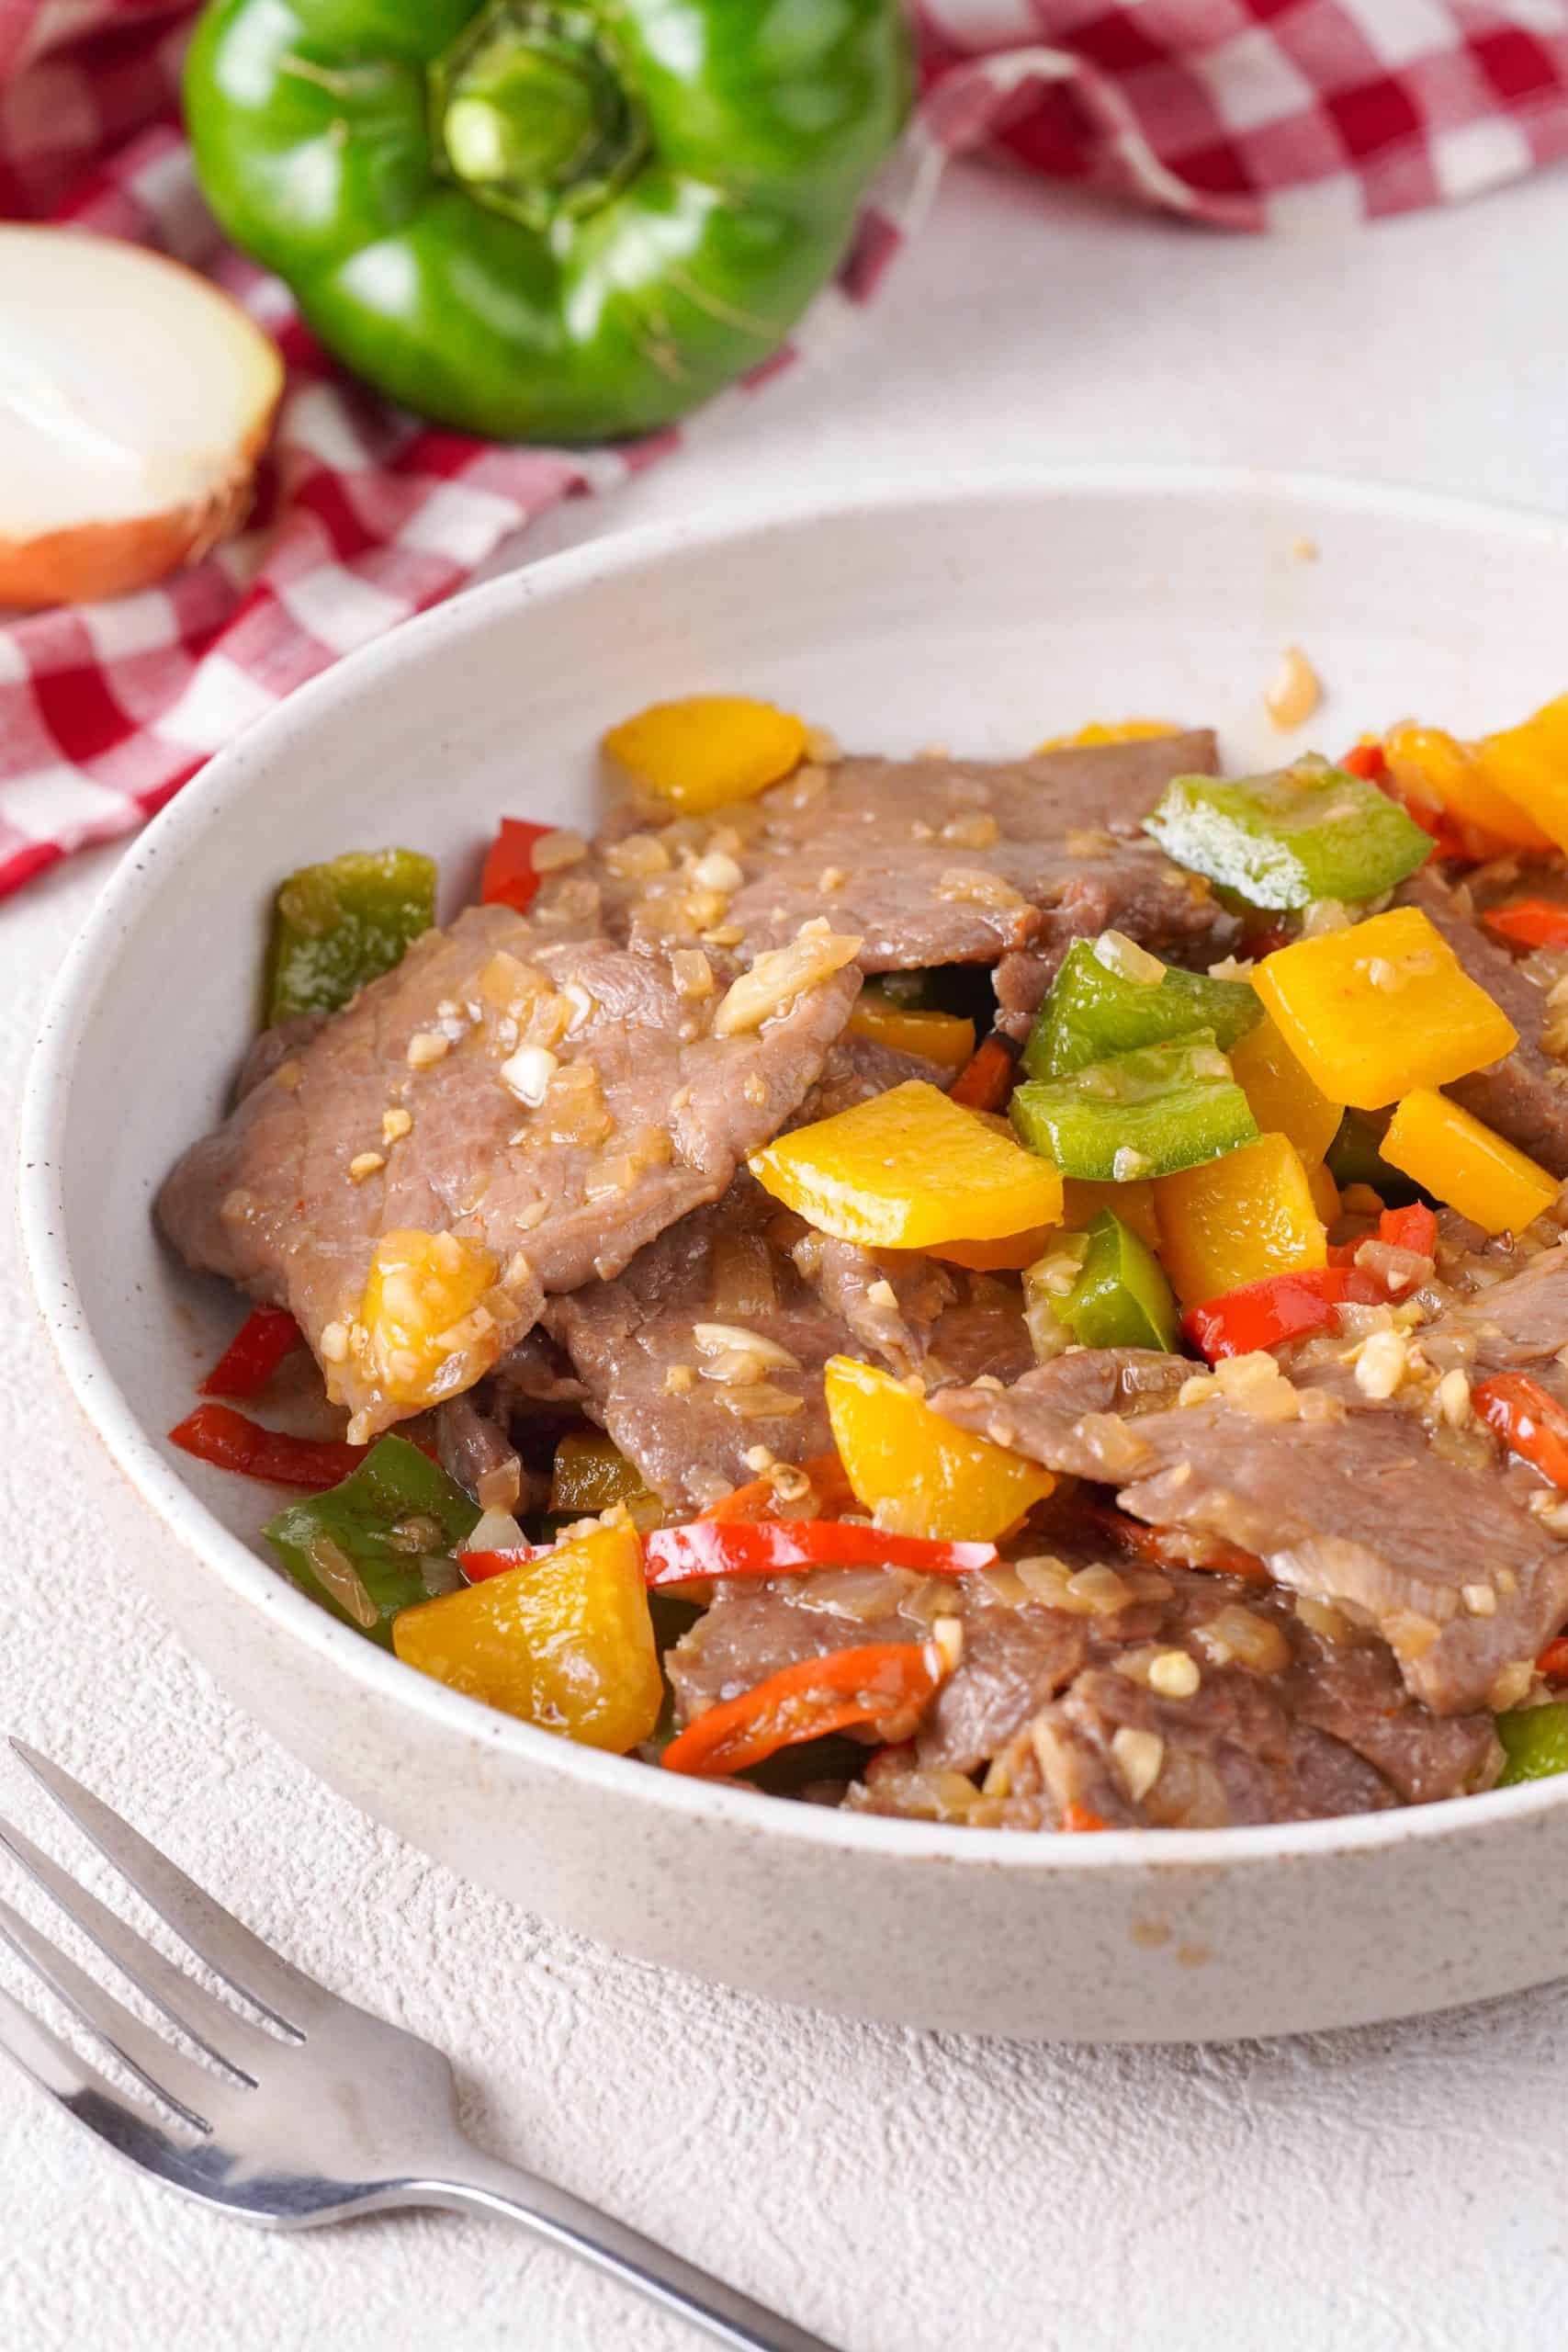 Today, I've picked a dish that comes from the Hunan province to share with you, Hunan beef. It's a spicy stir-fried dish made from thinly sliced beef and fresh vegetables, and it won't take you more than 30 minutes to make.